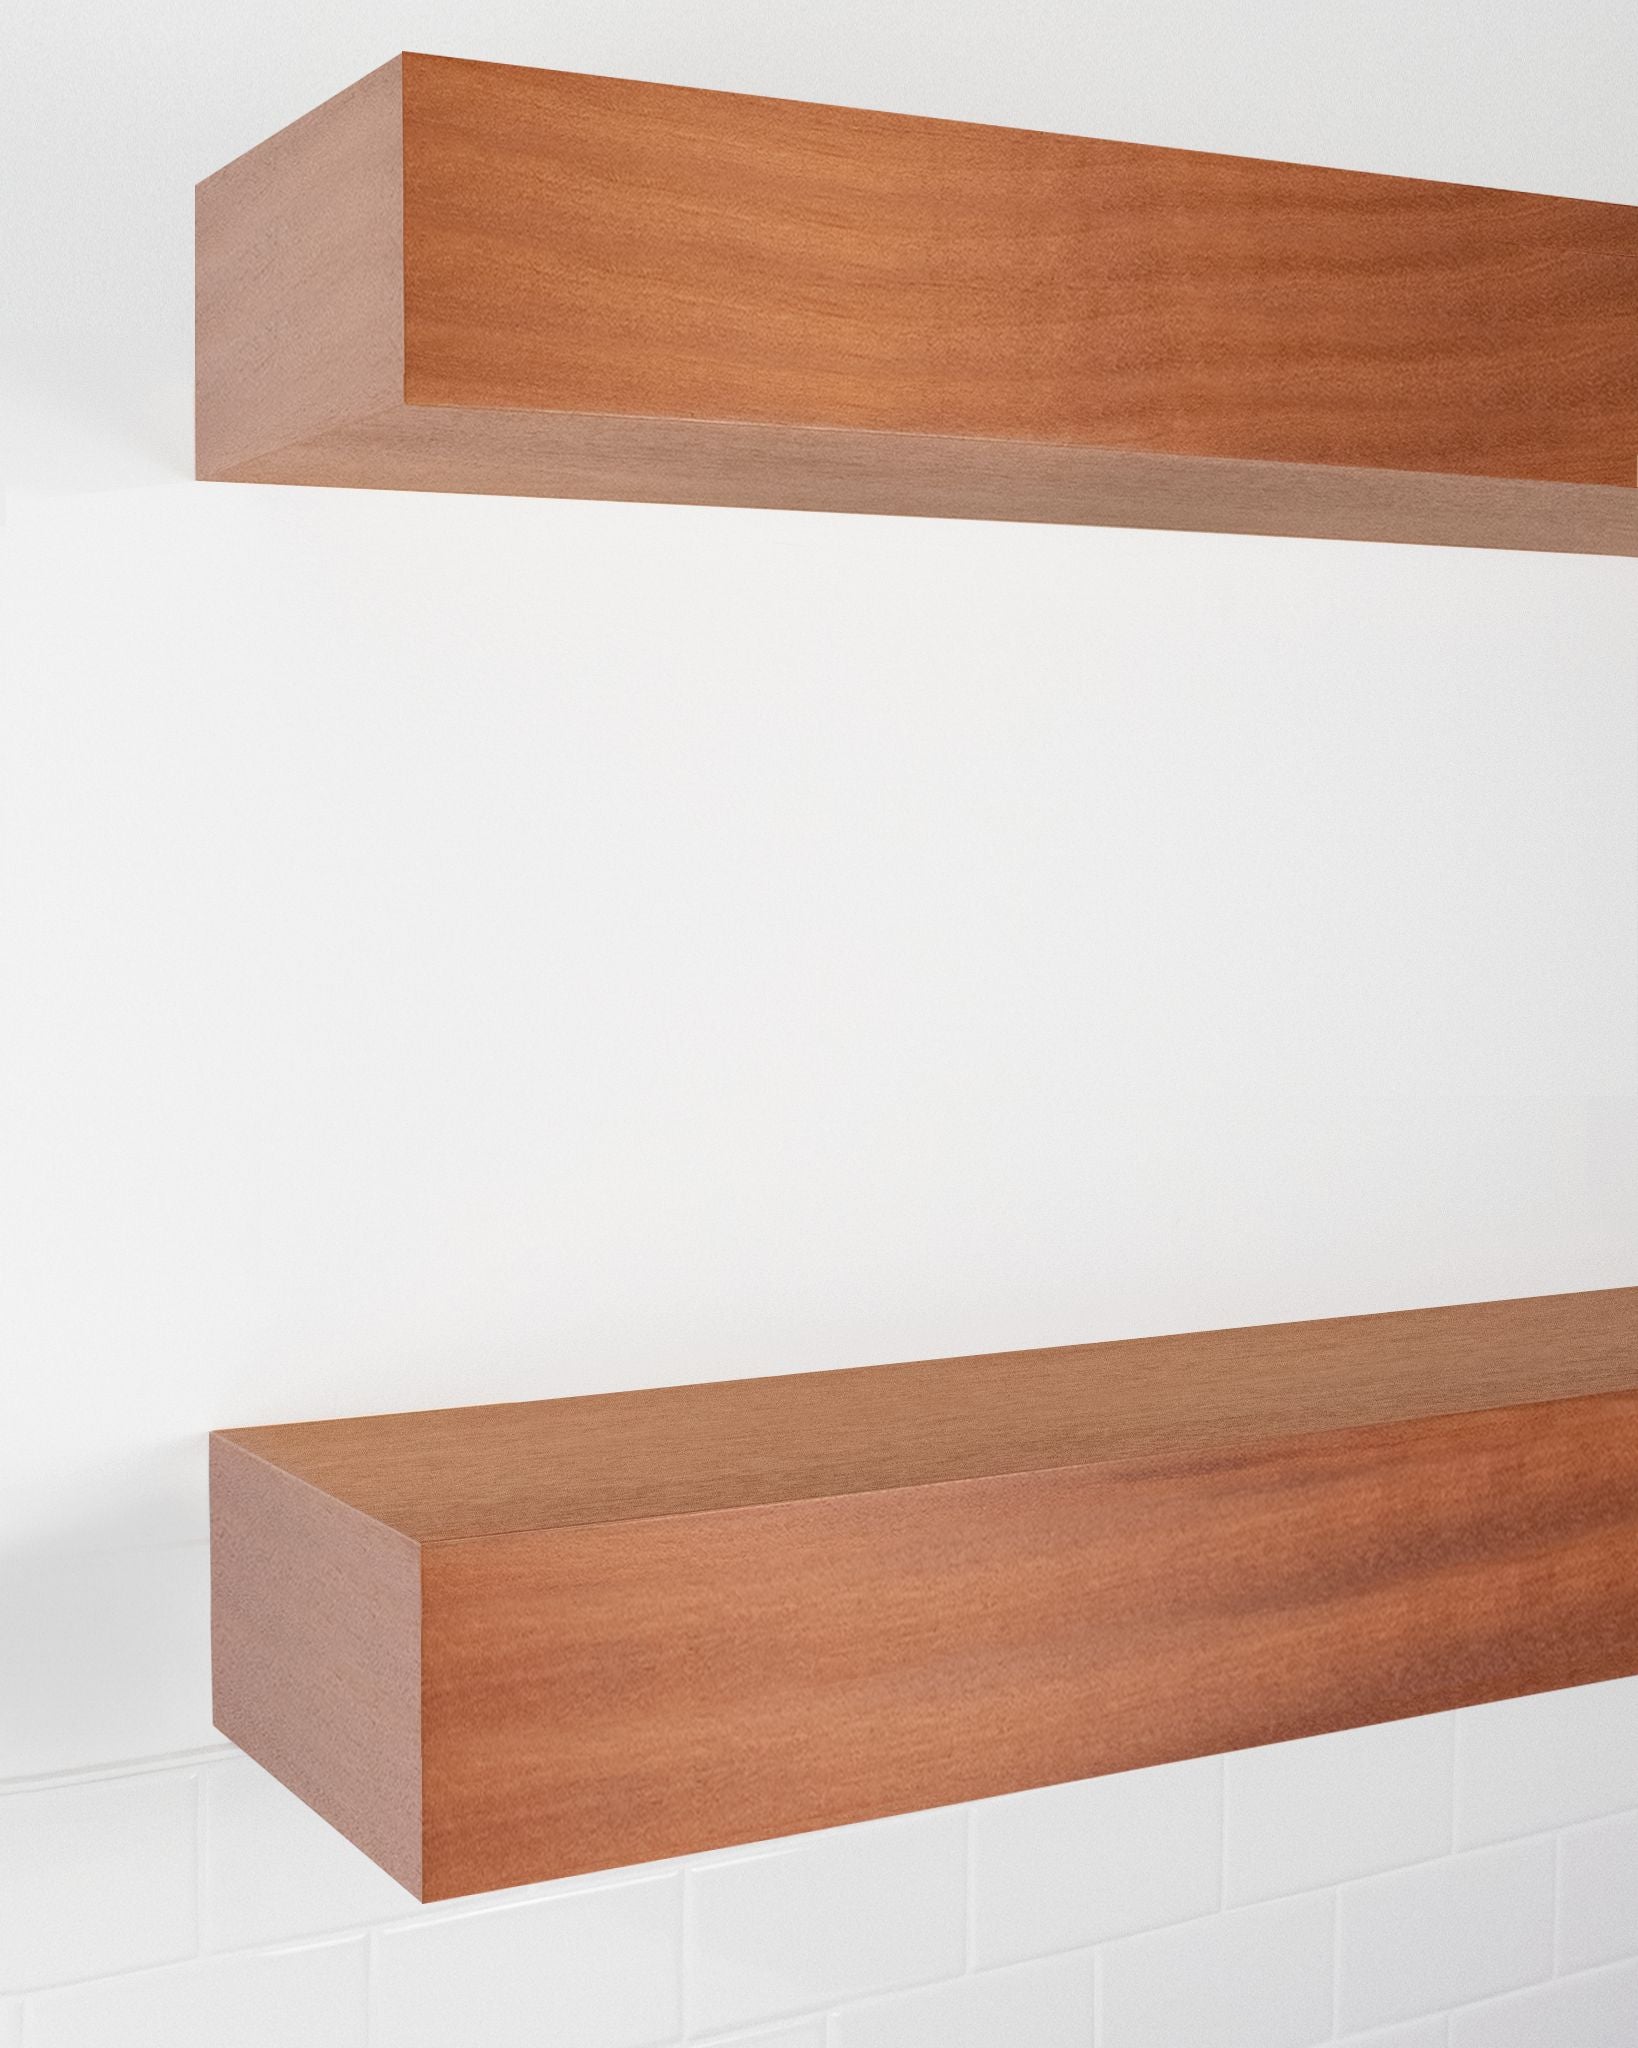 African Mahogany Floating Shelves 4.1-6" thick